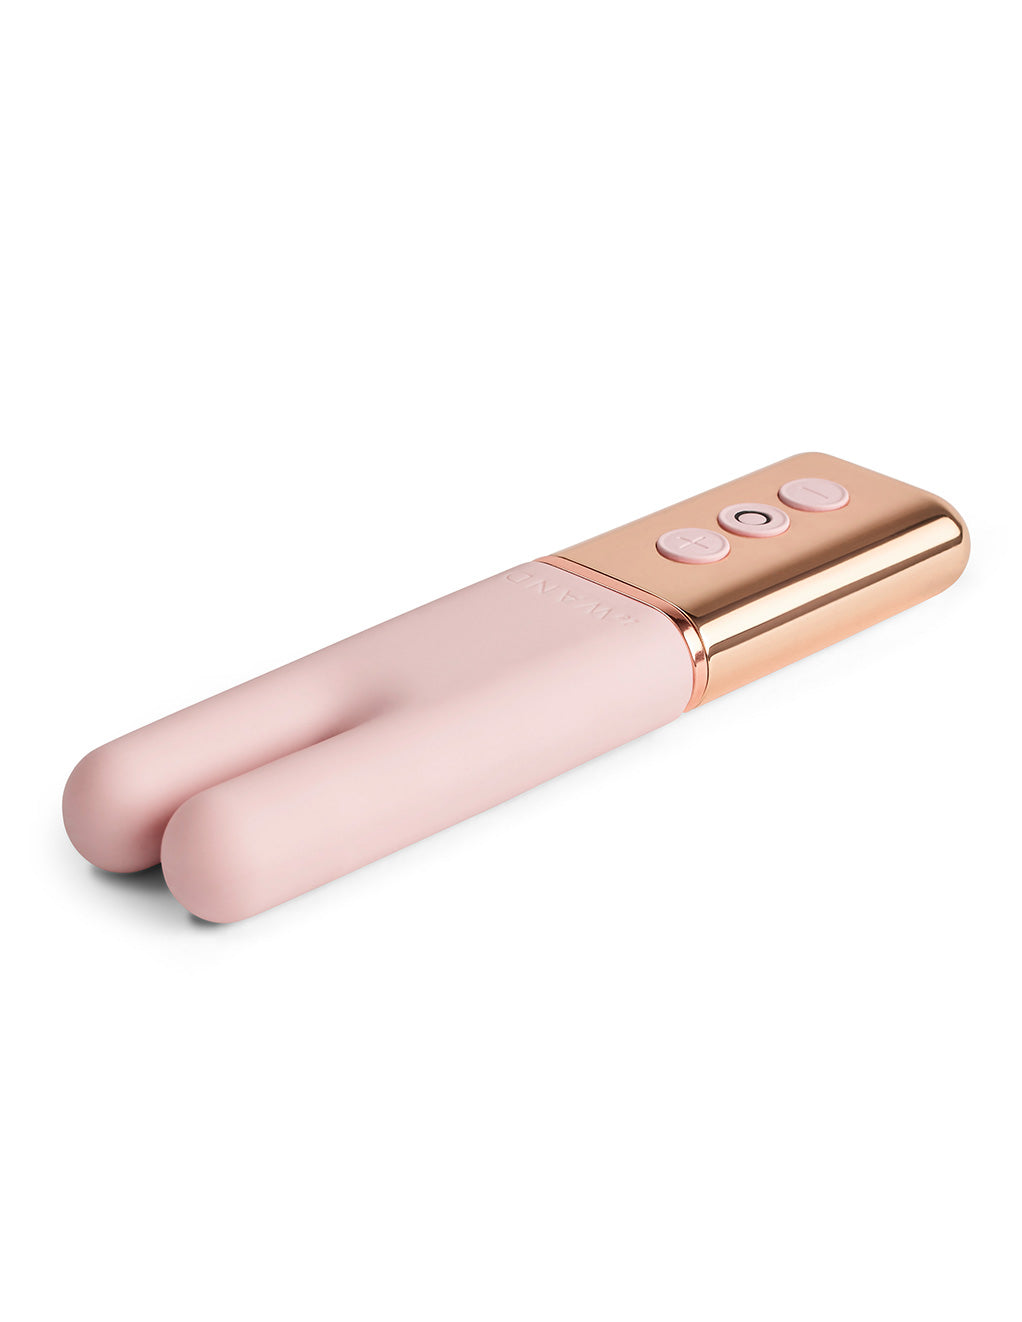 Le Wand Deux Rechargeable Clitoral Vibrator- Rose Gold- Top